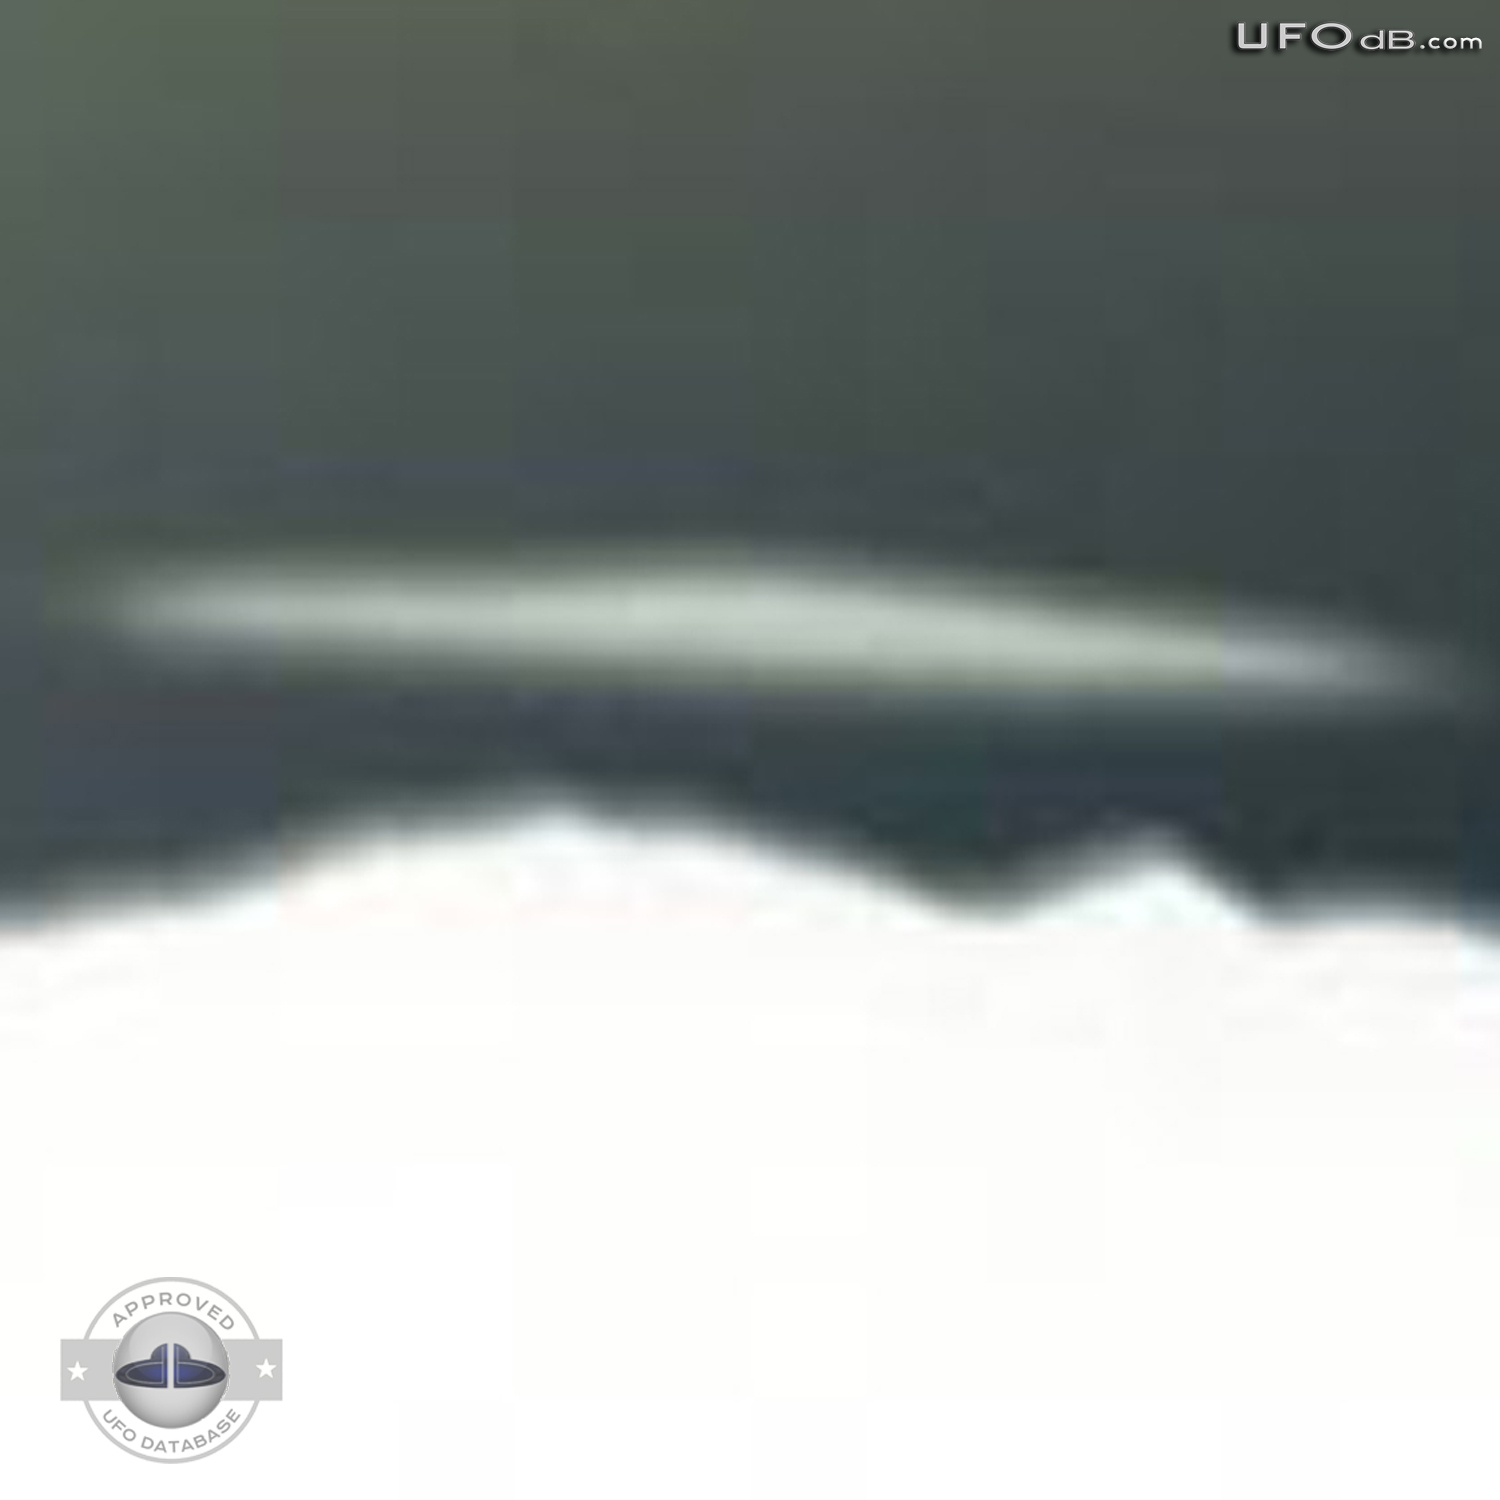 Renowned Aviator shoot a UFO picture in Cachi, Argentina | April 2011 UFO Picture #283-4